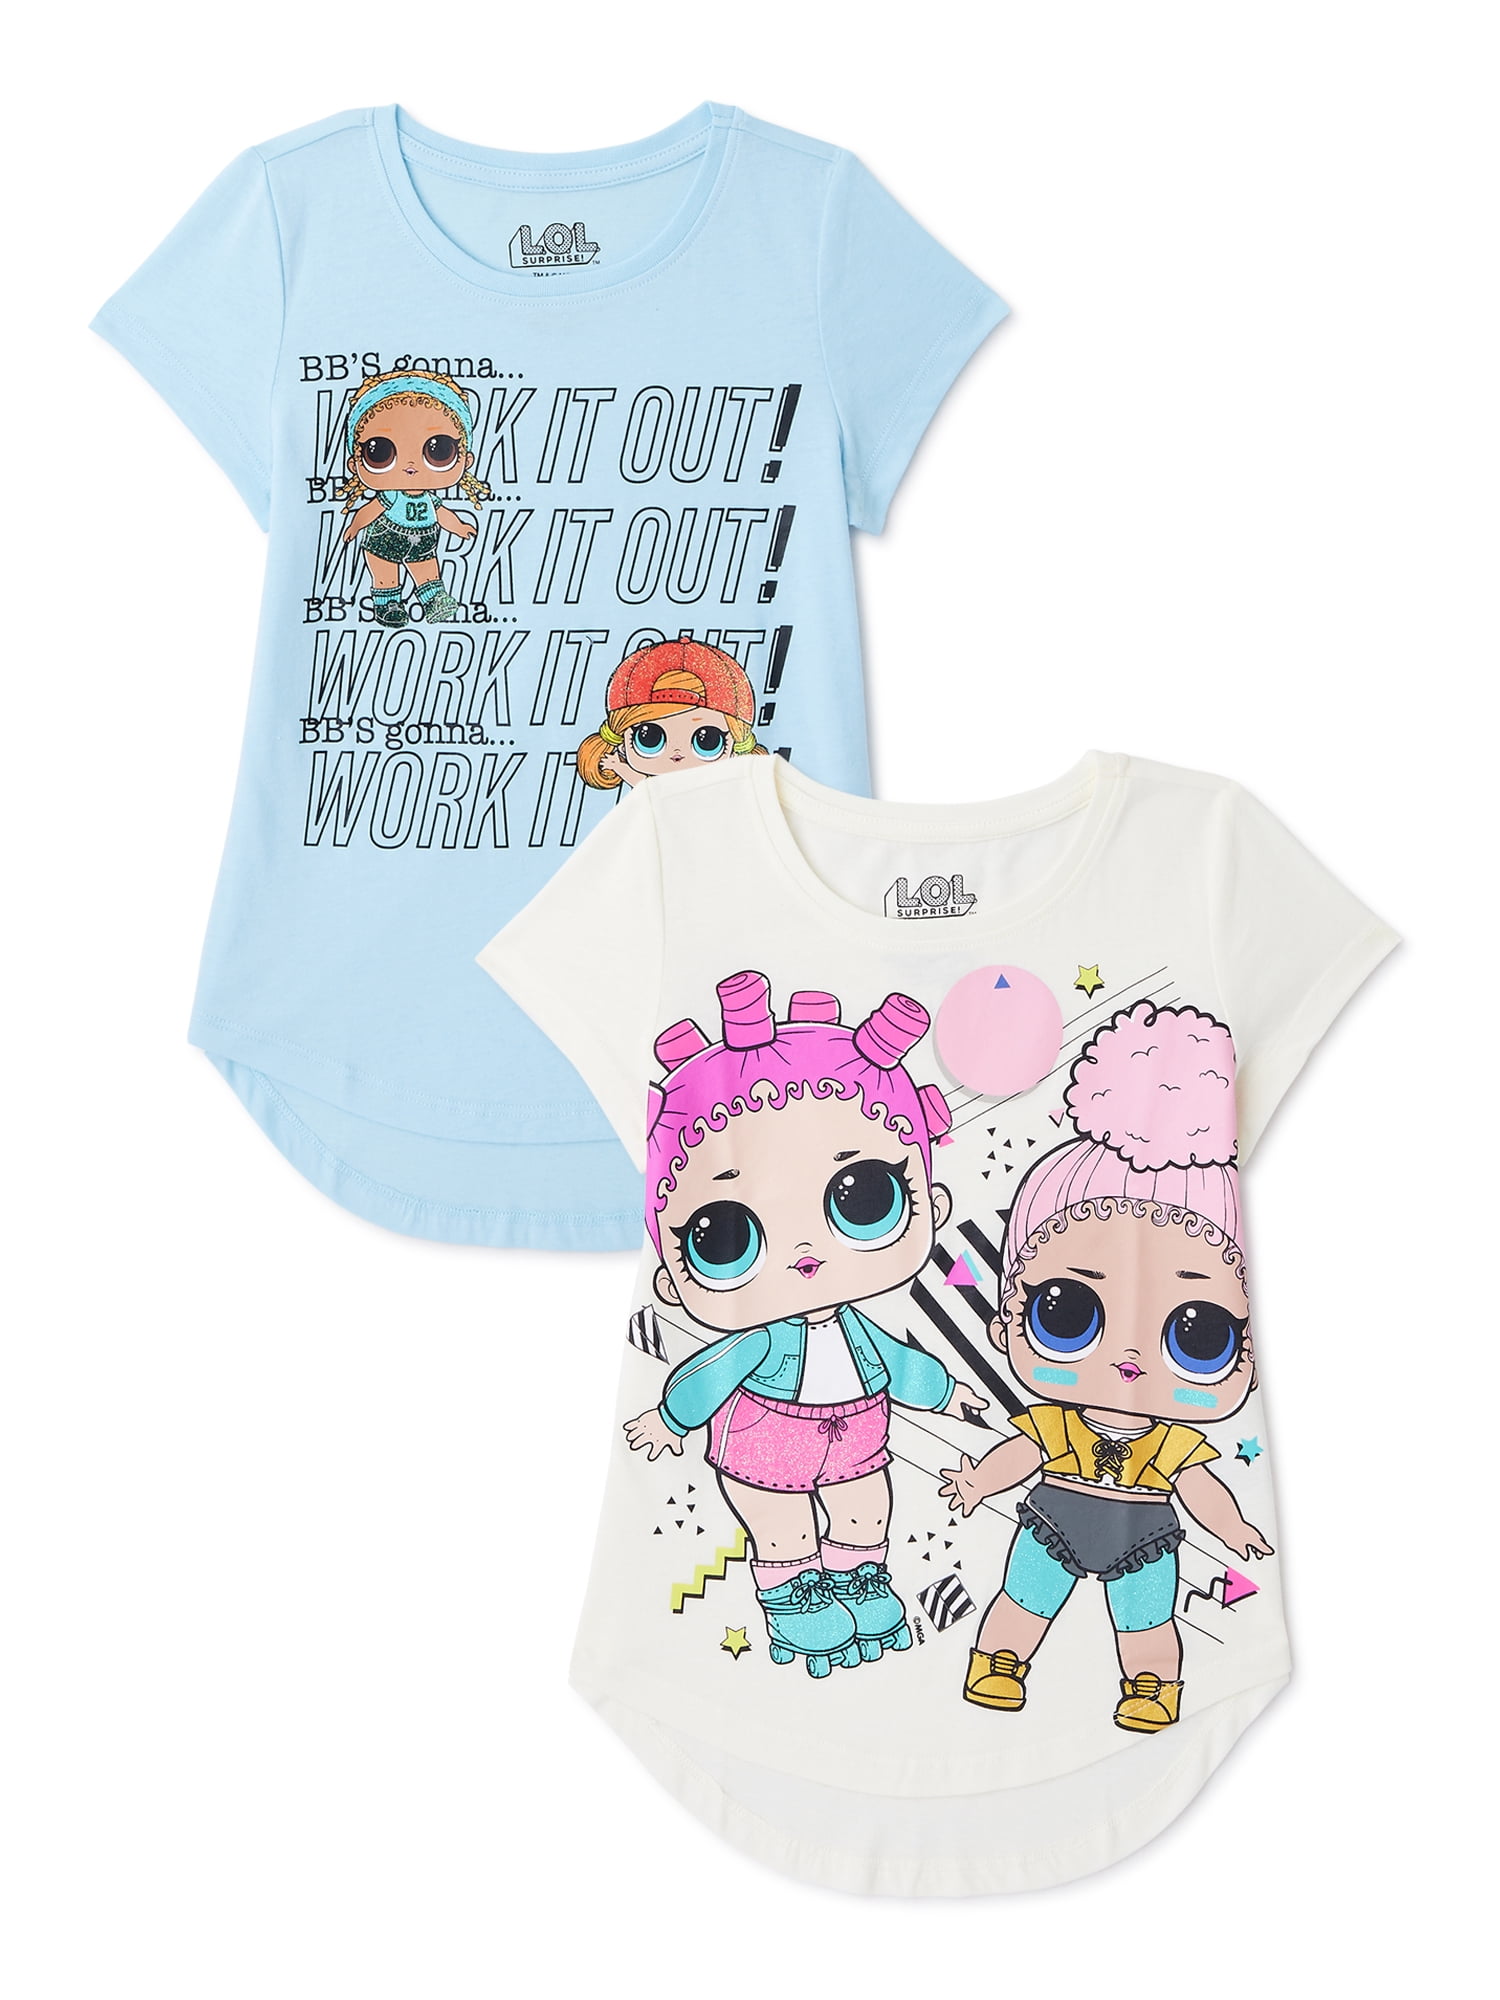 Buy L.O.L. Surprise! Girls Glitter Graphic T-Shirts, 2-Pack, Sizes 4-18  Online in Nigeria. 229536157